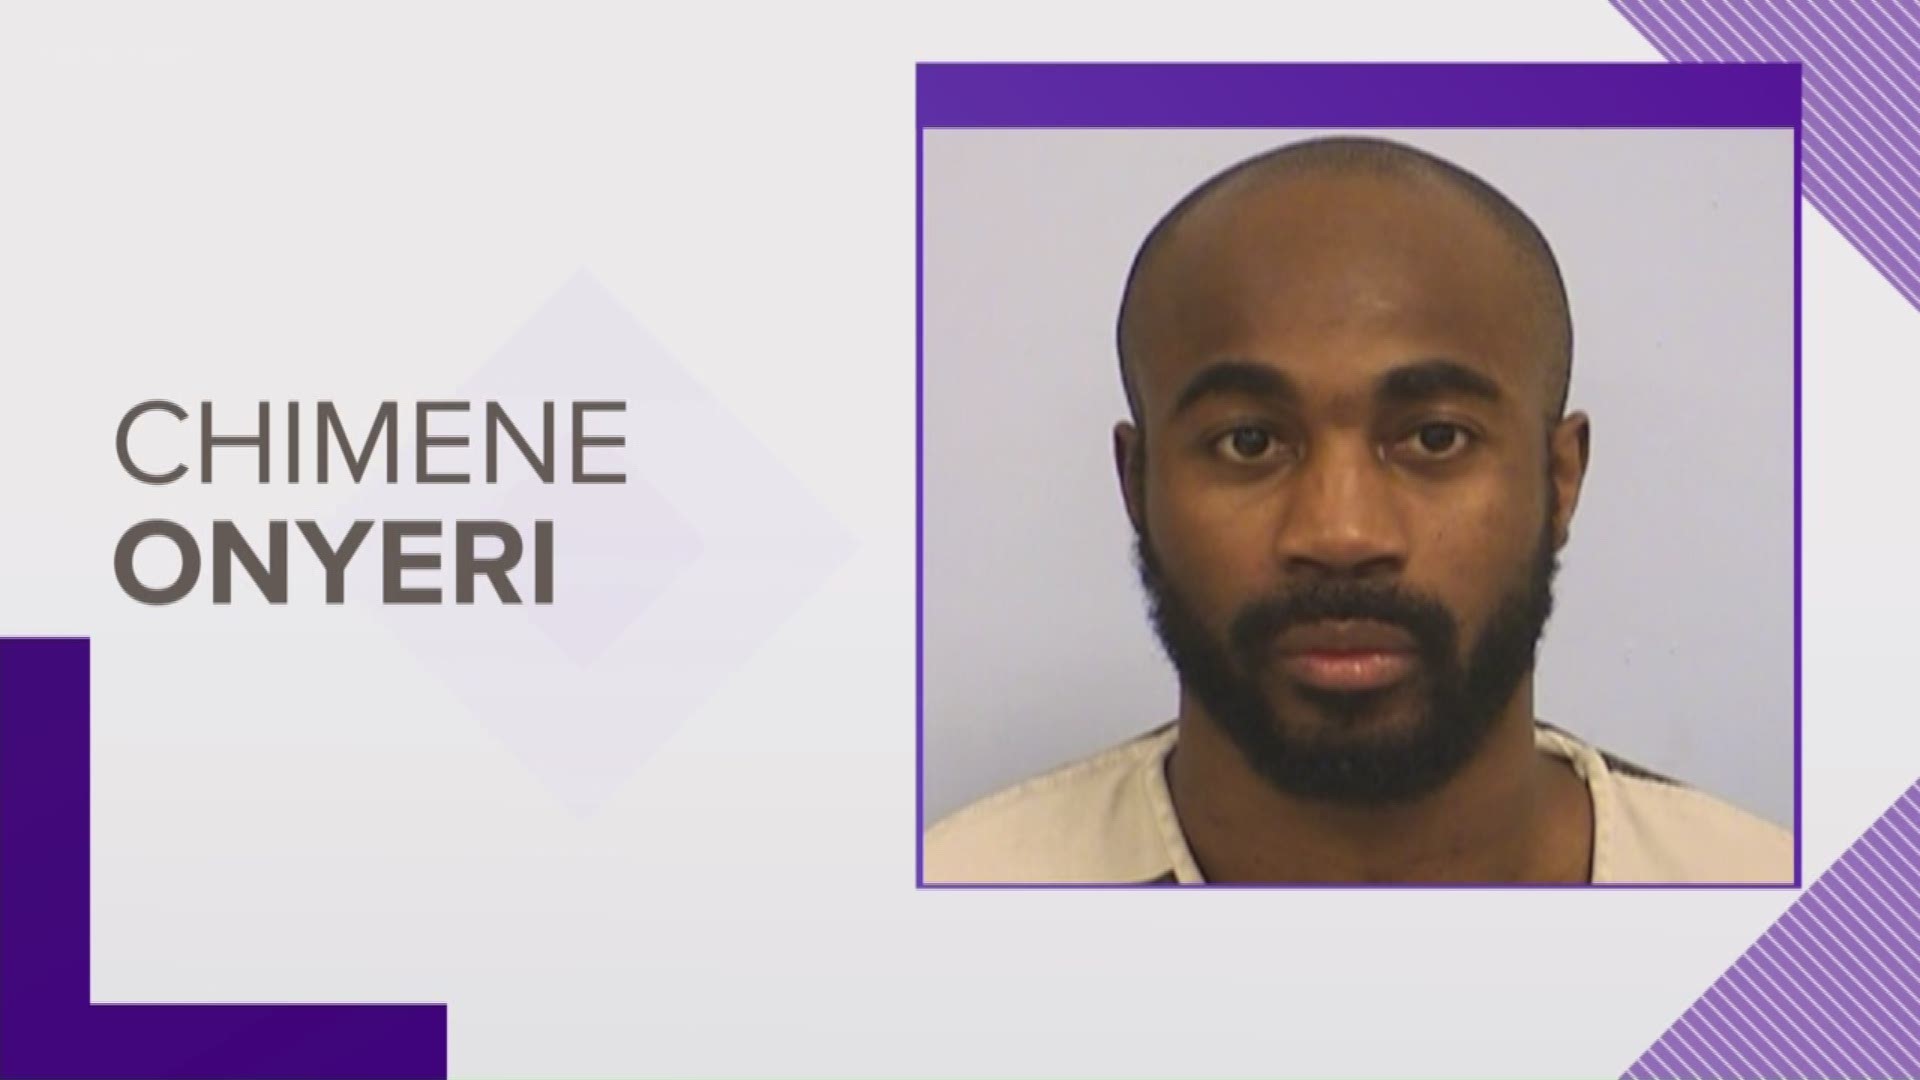 Chimene Onyeri appeared in court Monday to face a 17-count indictment after he allegedly attempted to kill Travis County District Judge Julie Kocurek.